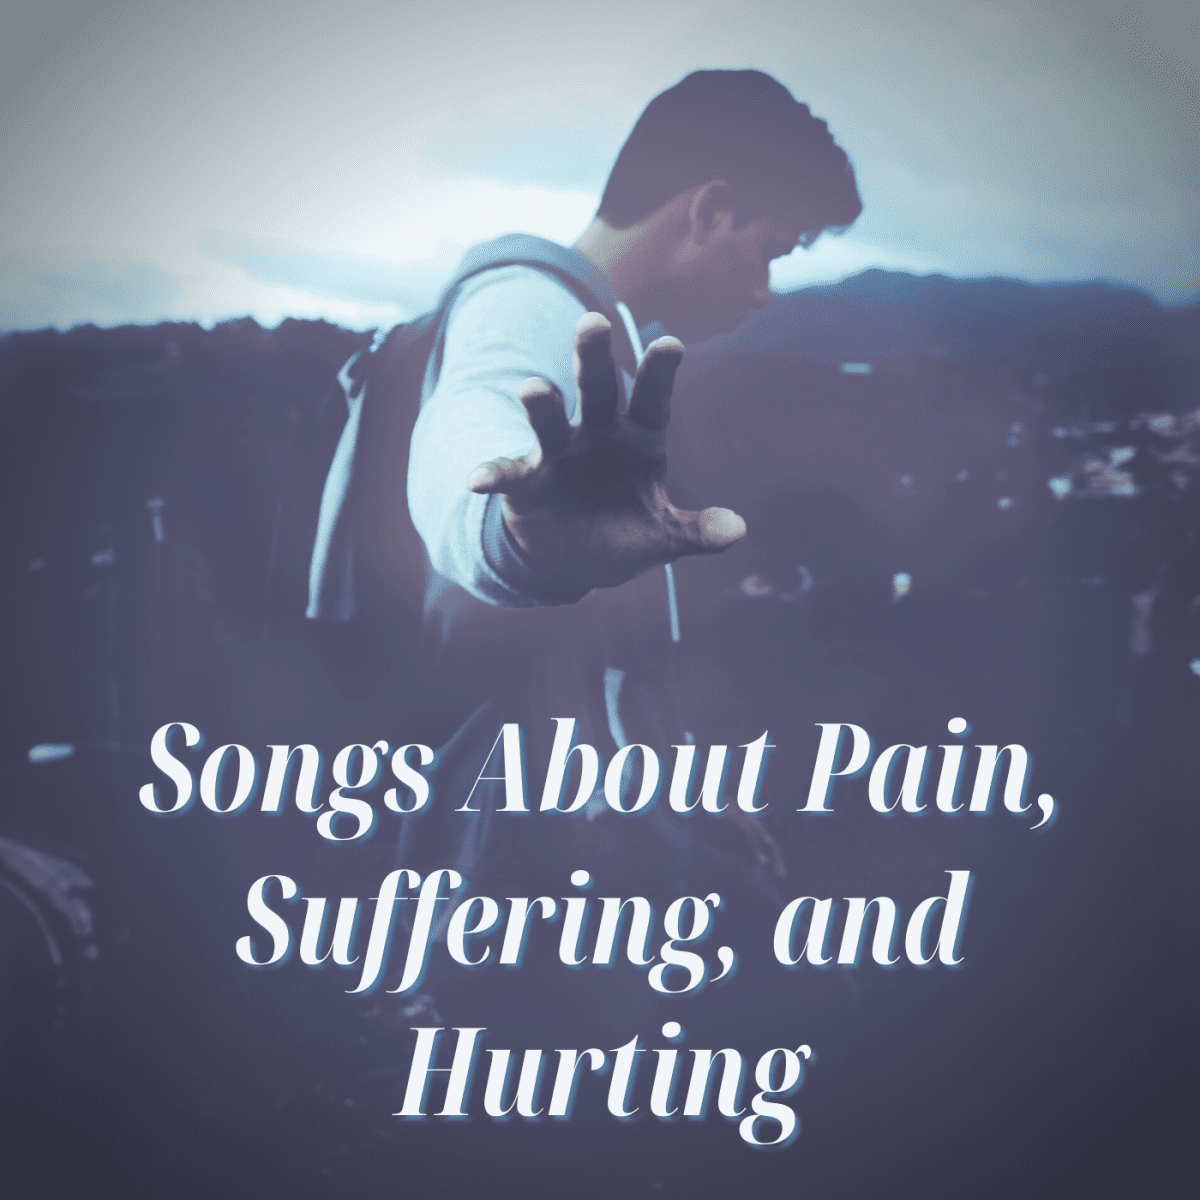 48 Songs About Pain, Suffering, and Hurting - Spinditty